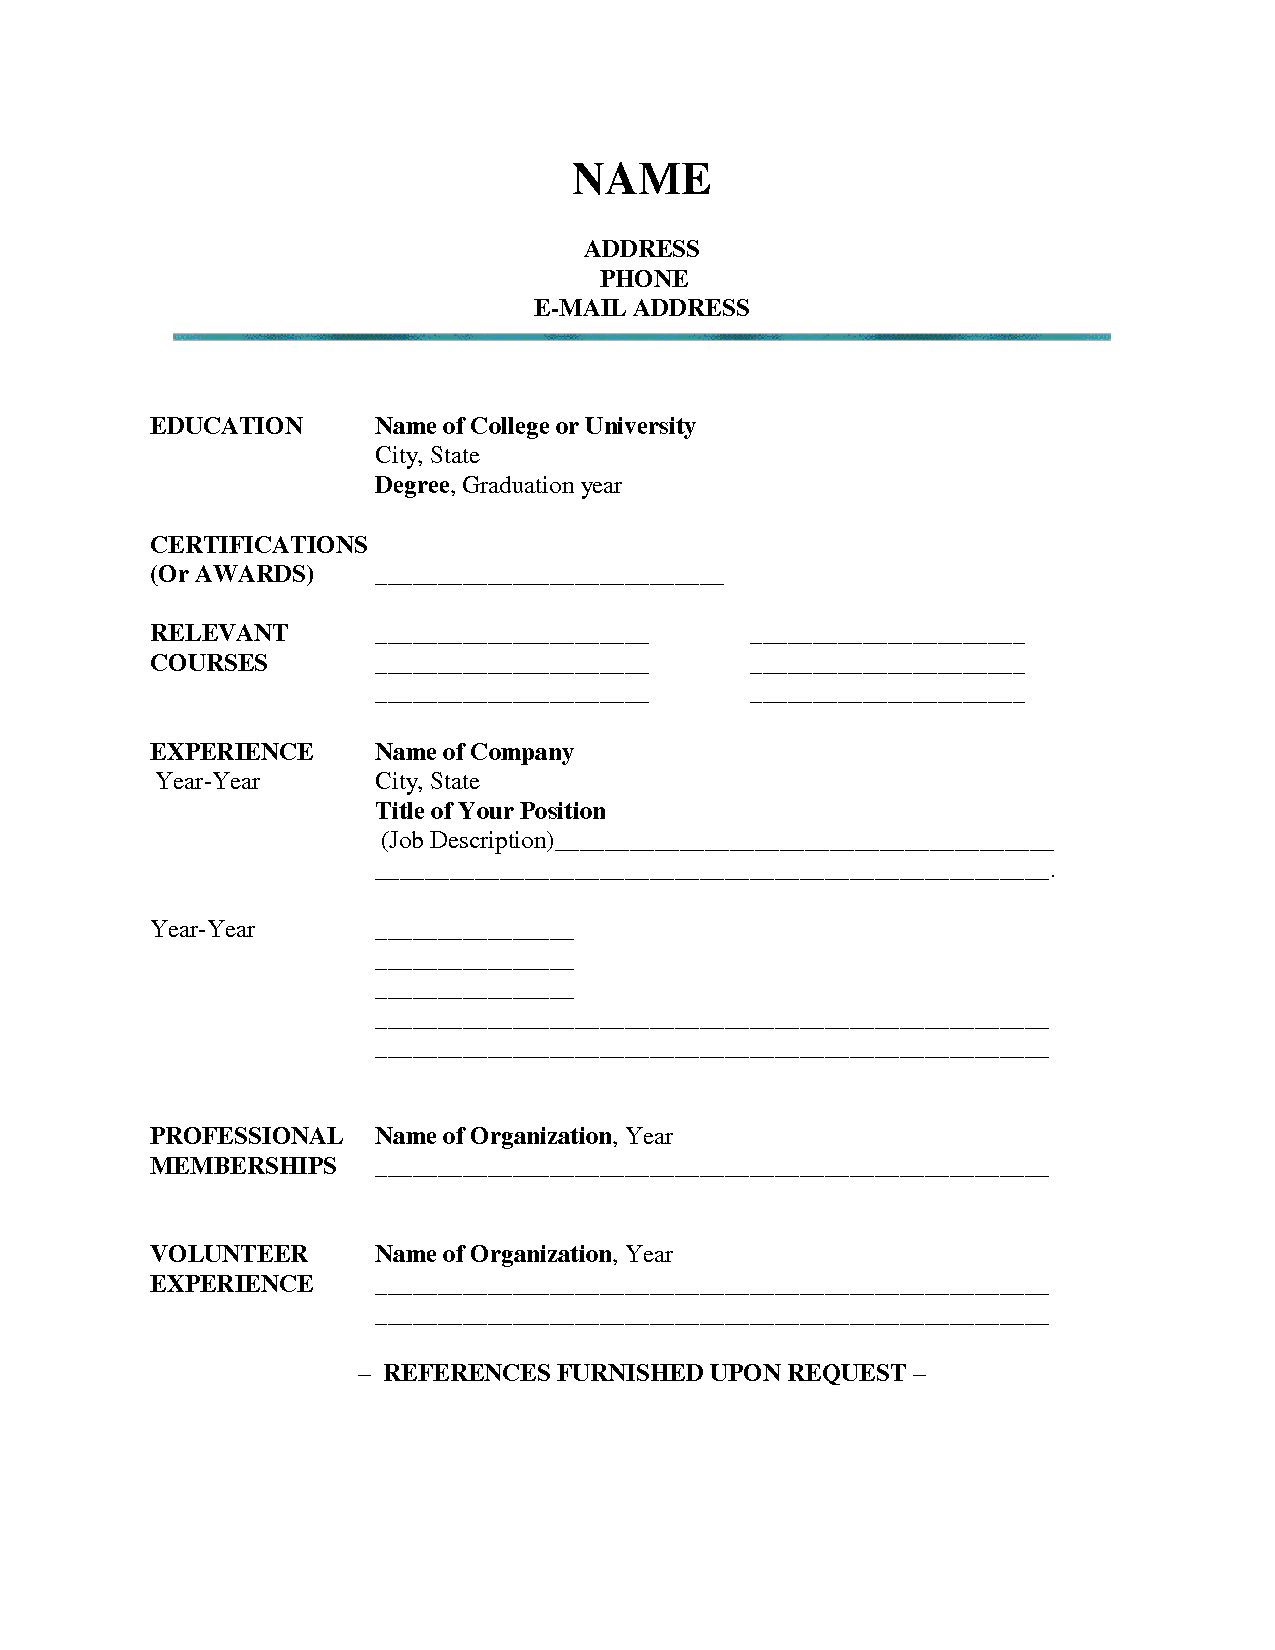 Resume Template For Microsoft Word Cover Letter Cover Letter For Blank Resume Templates For Microsoft Word